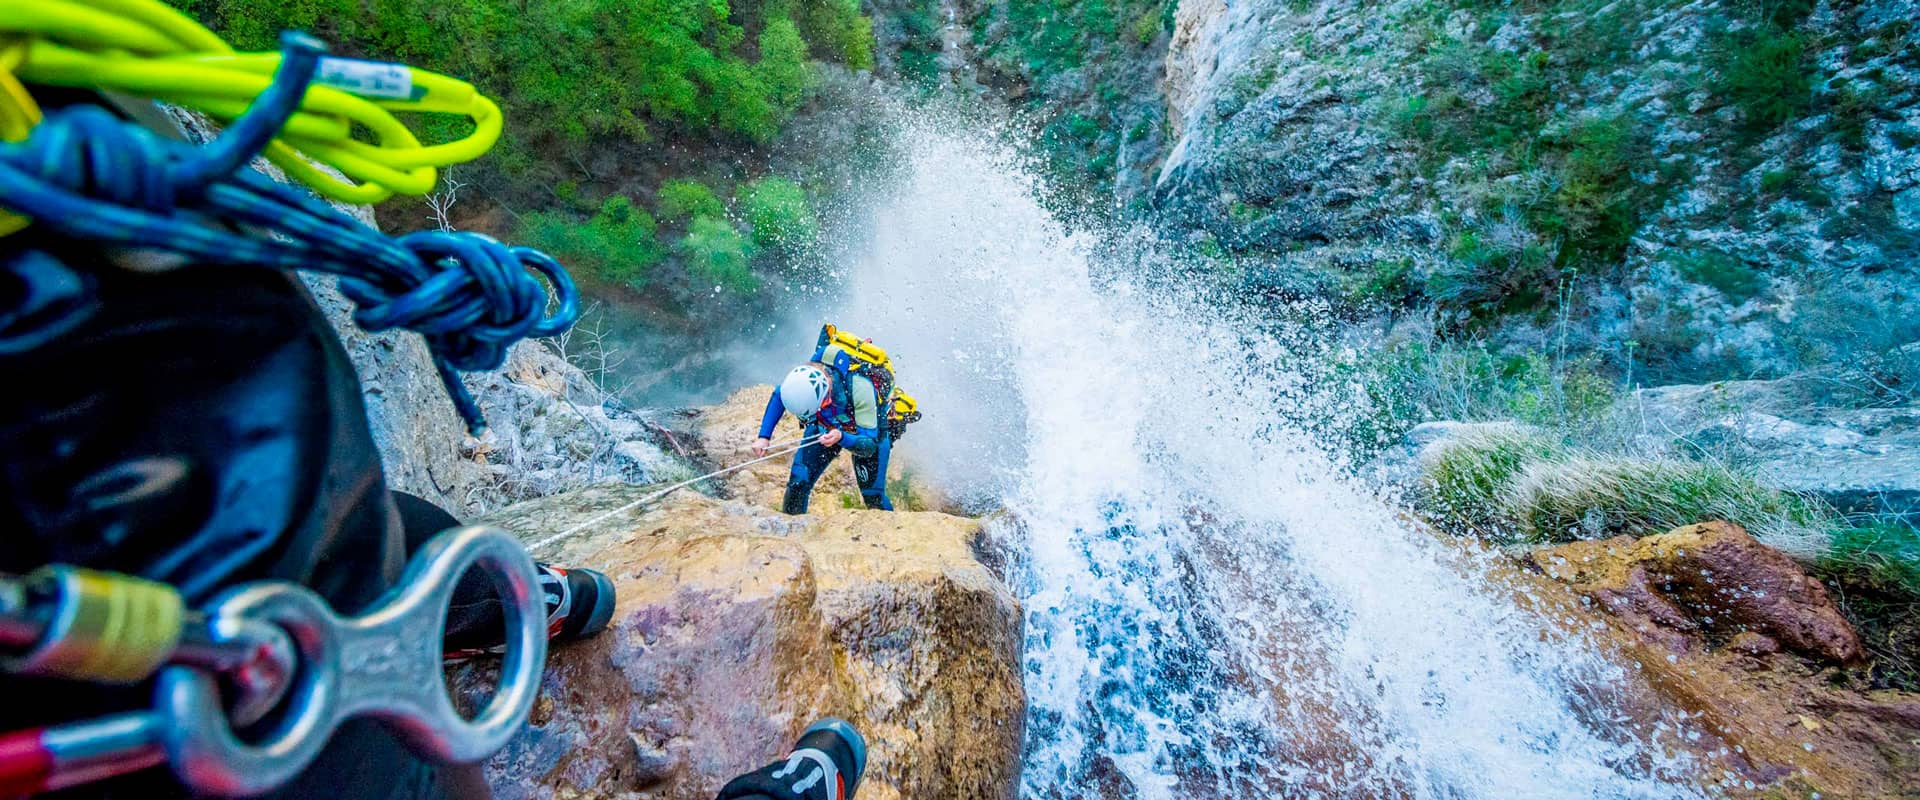 Stage de formation canyoning à Grenoble